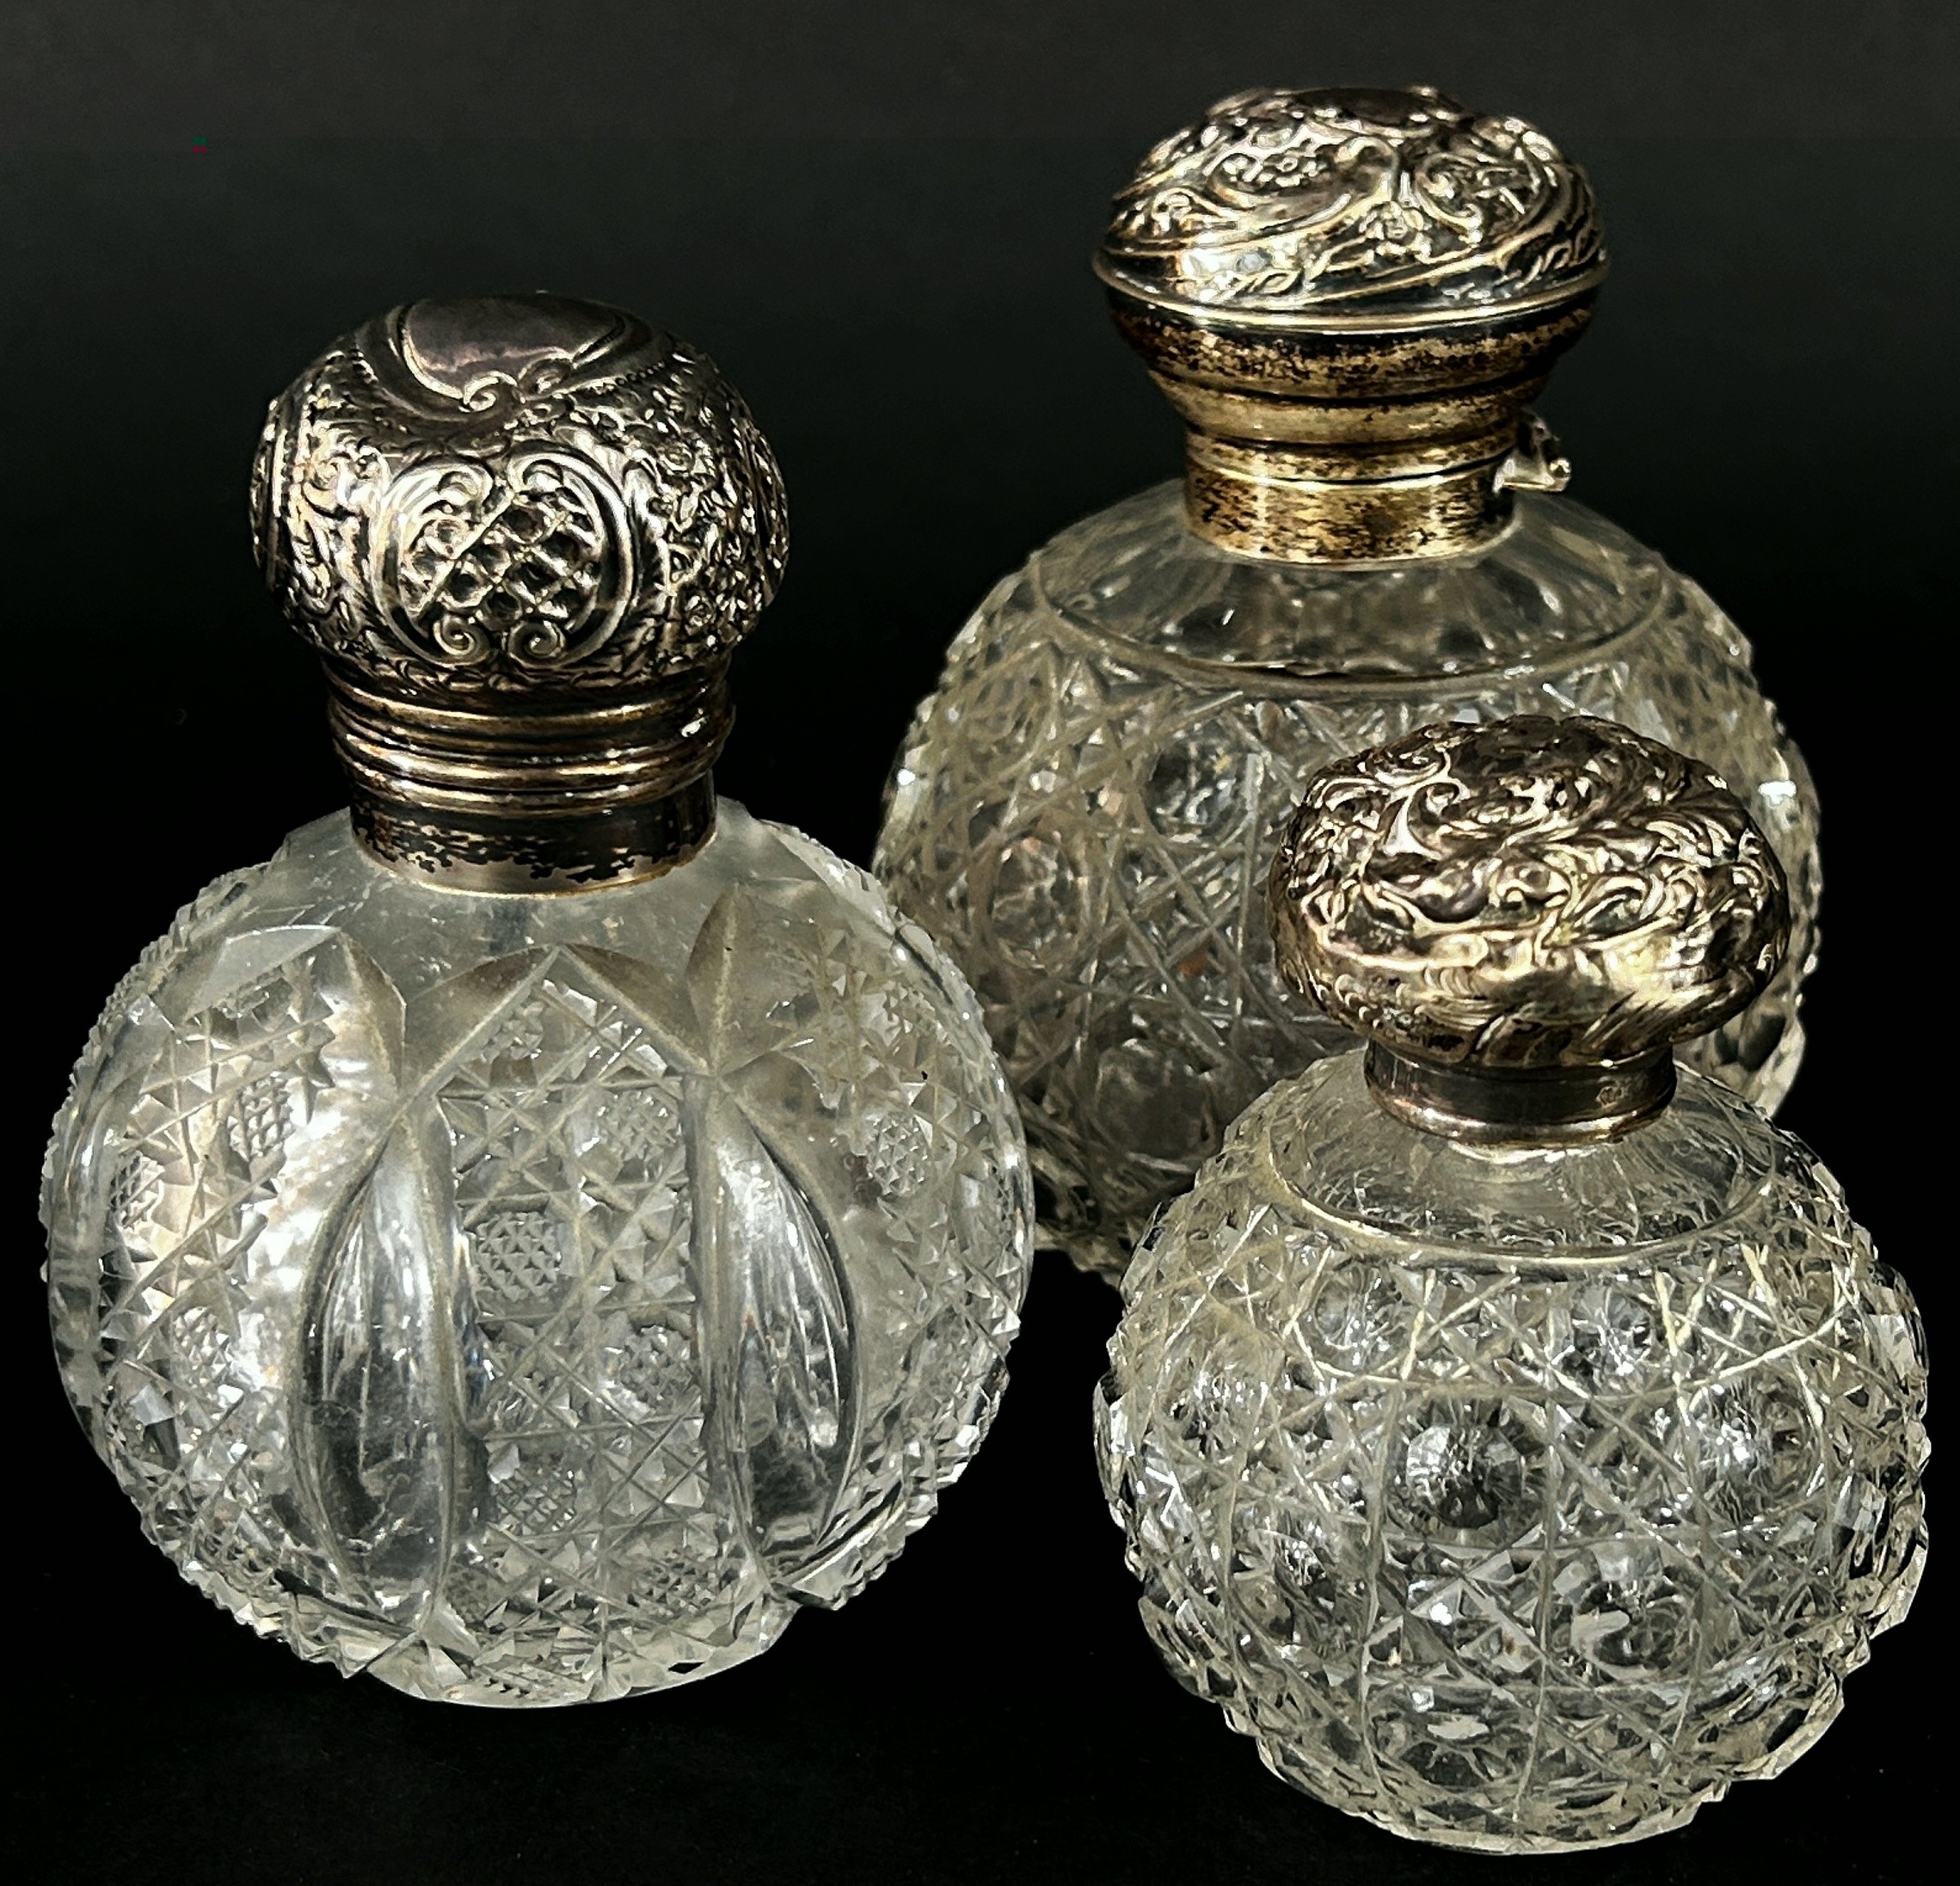 Three 19th century cut glass perfume bottles all with silver caps